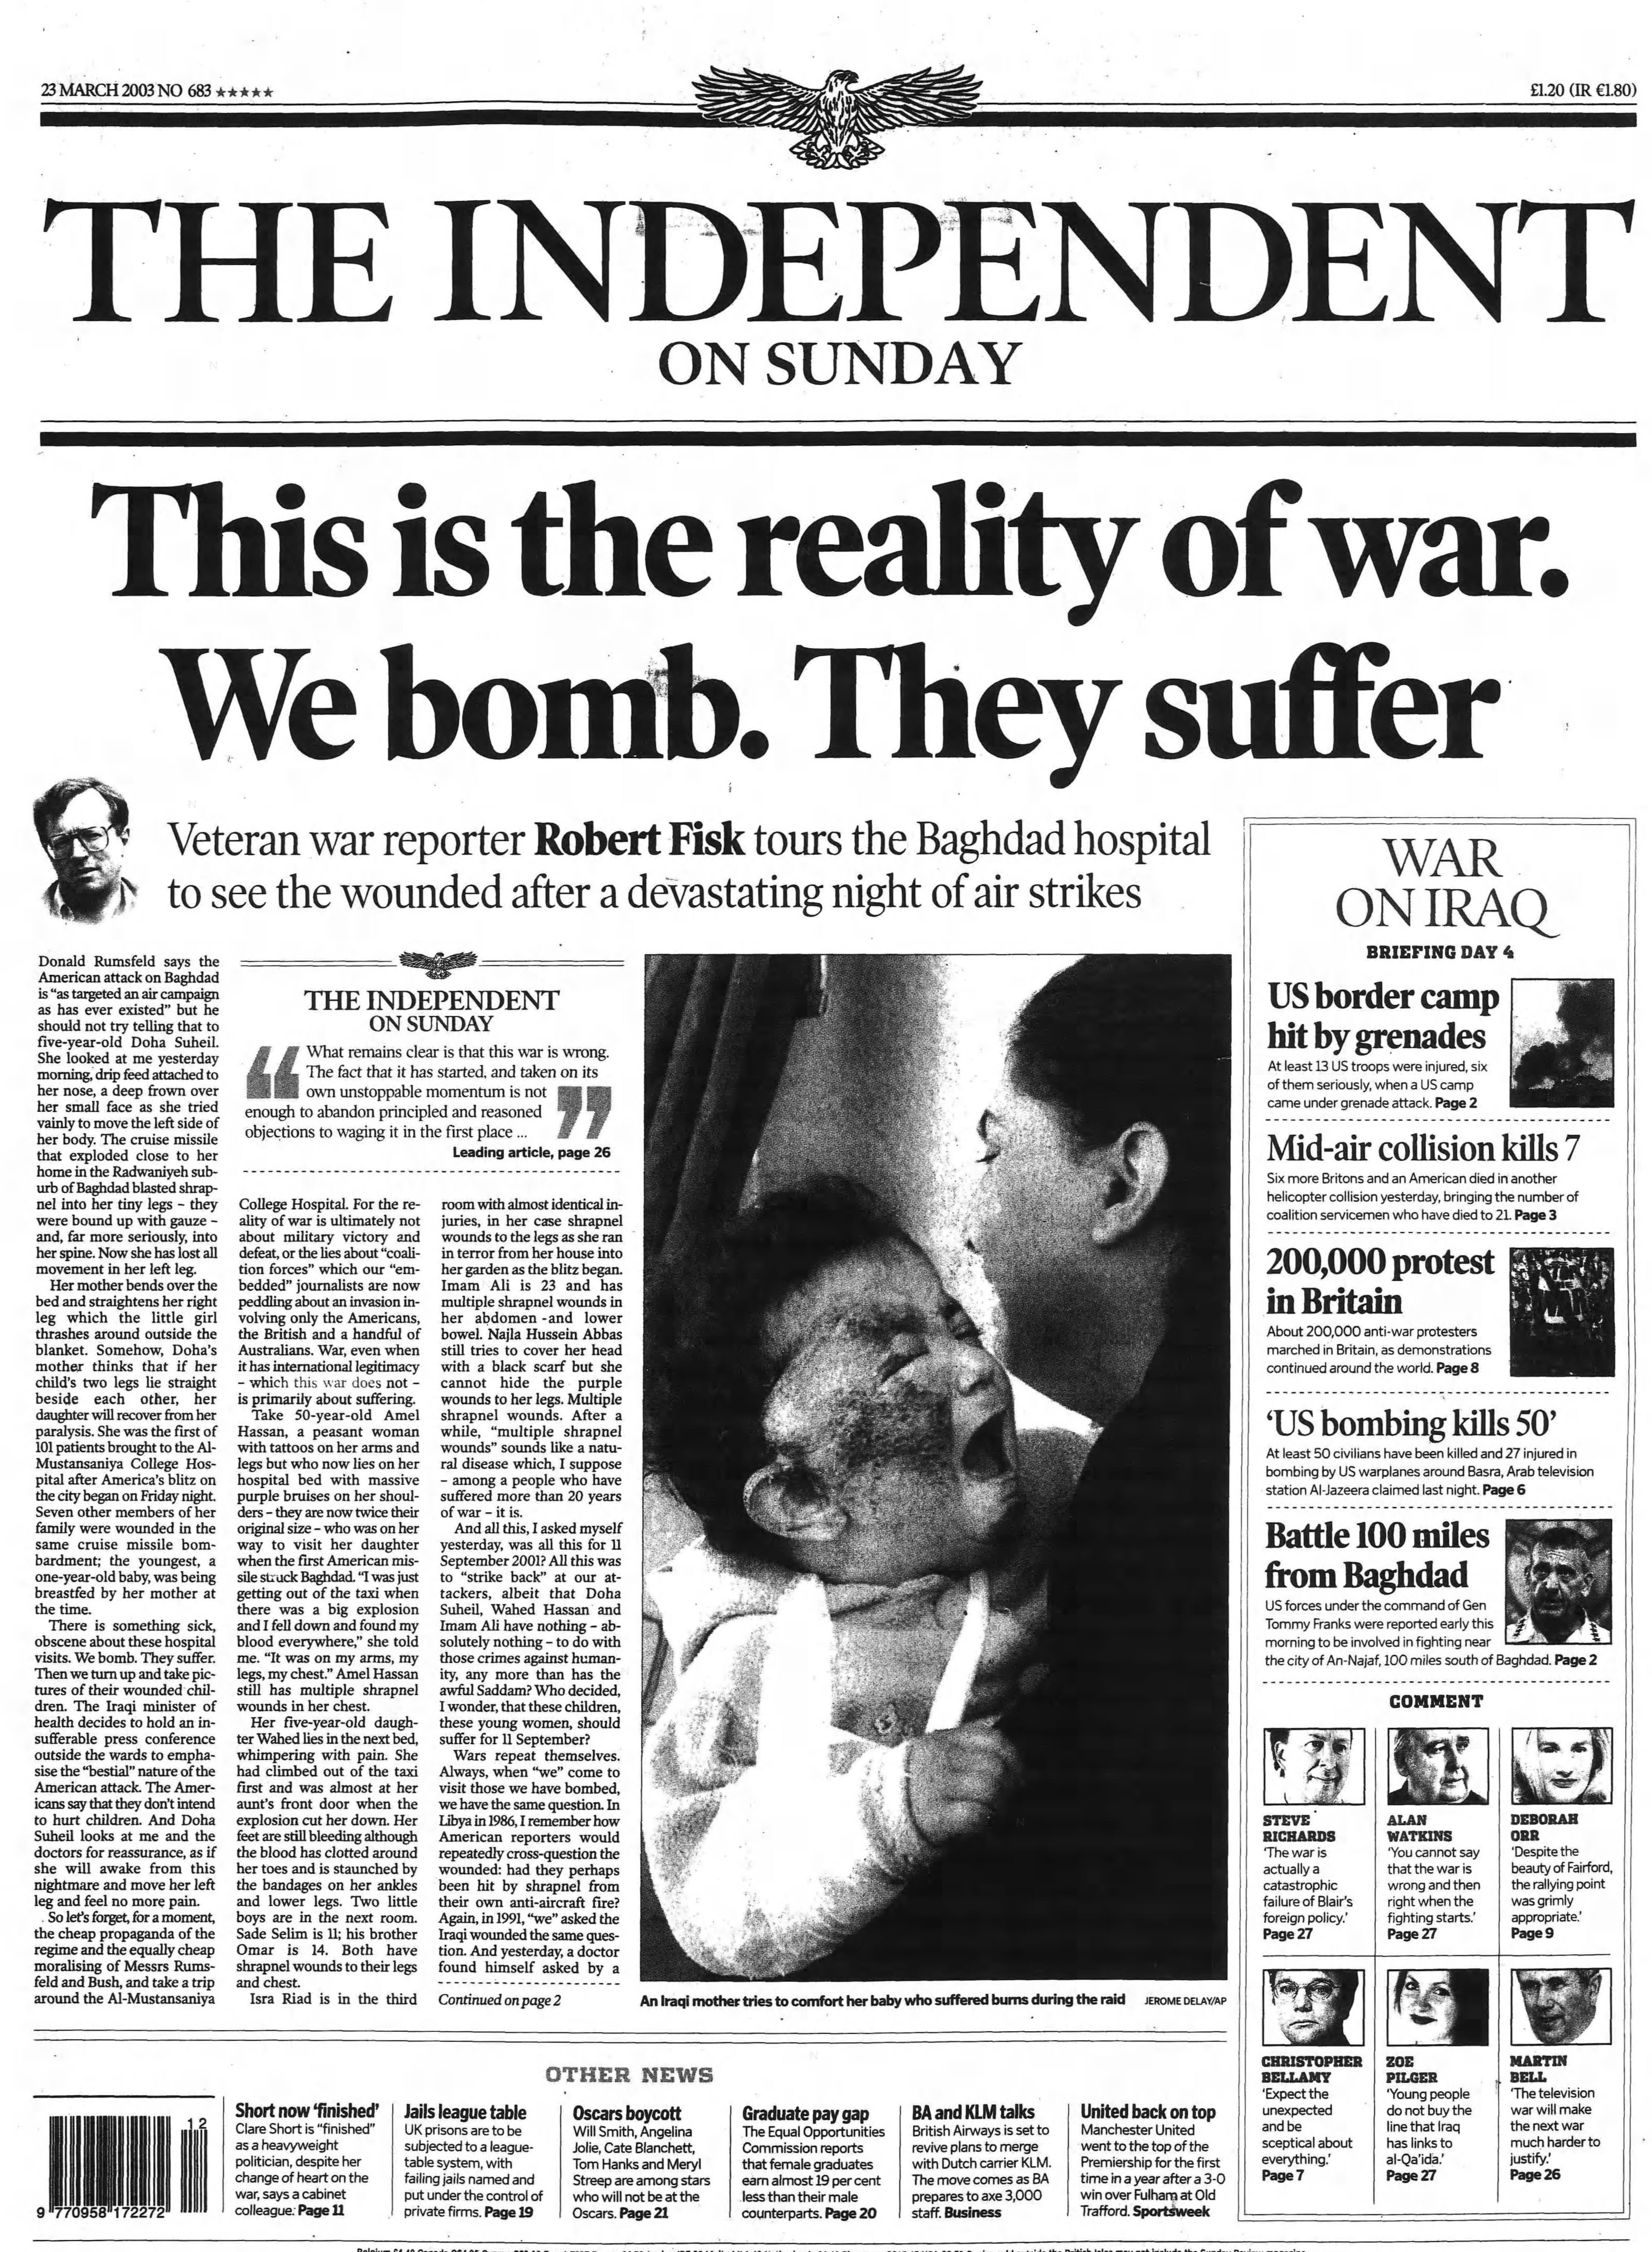 The Independent front page on 23 March 2003